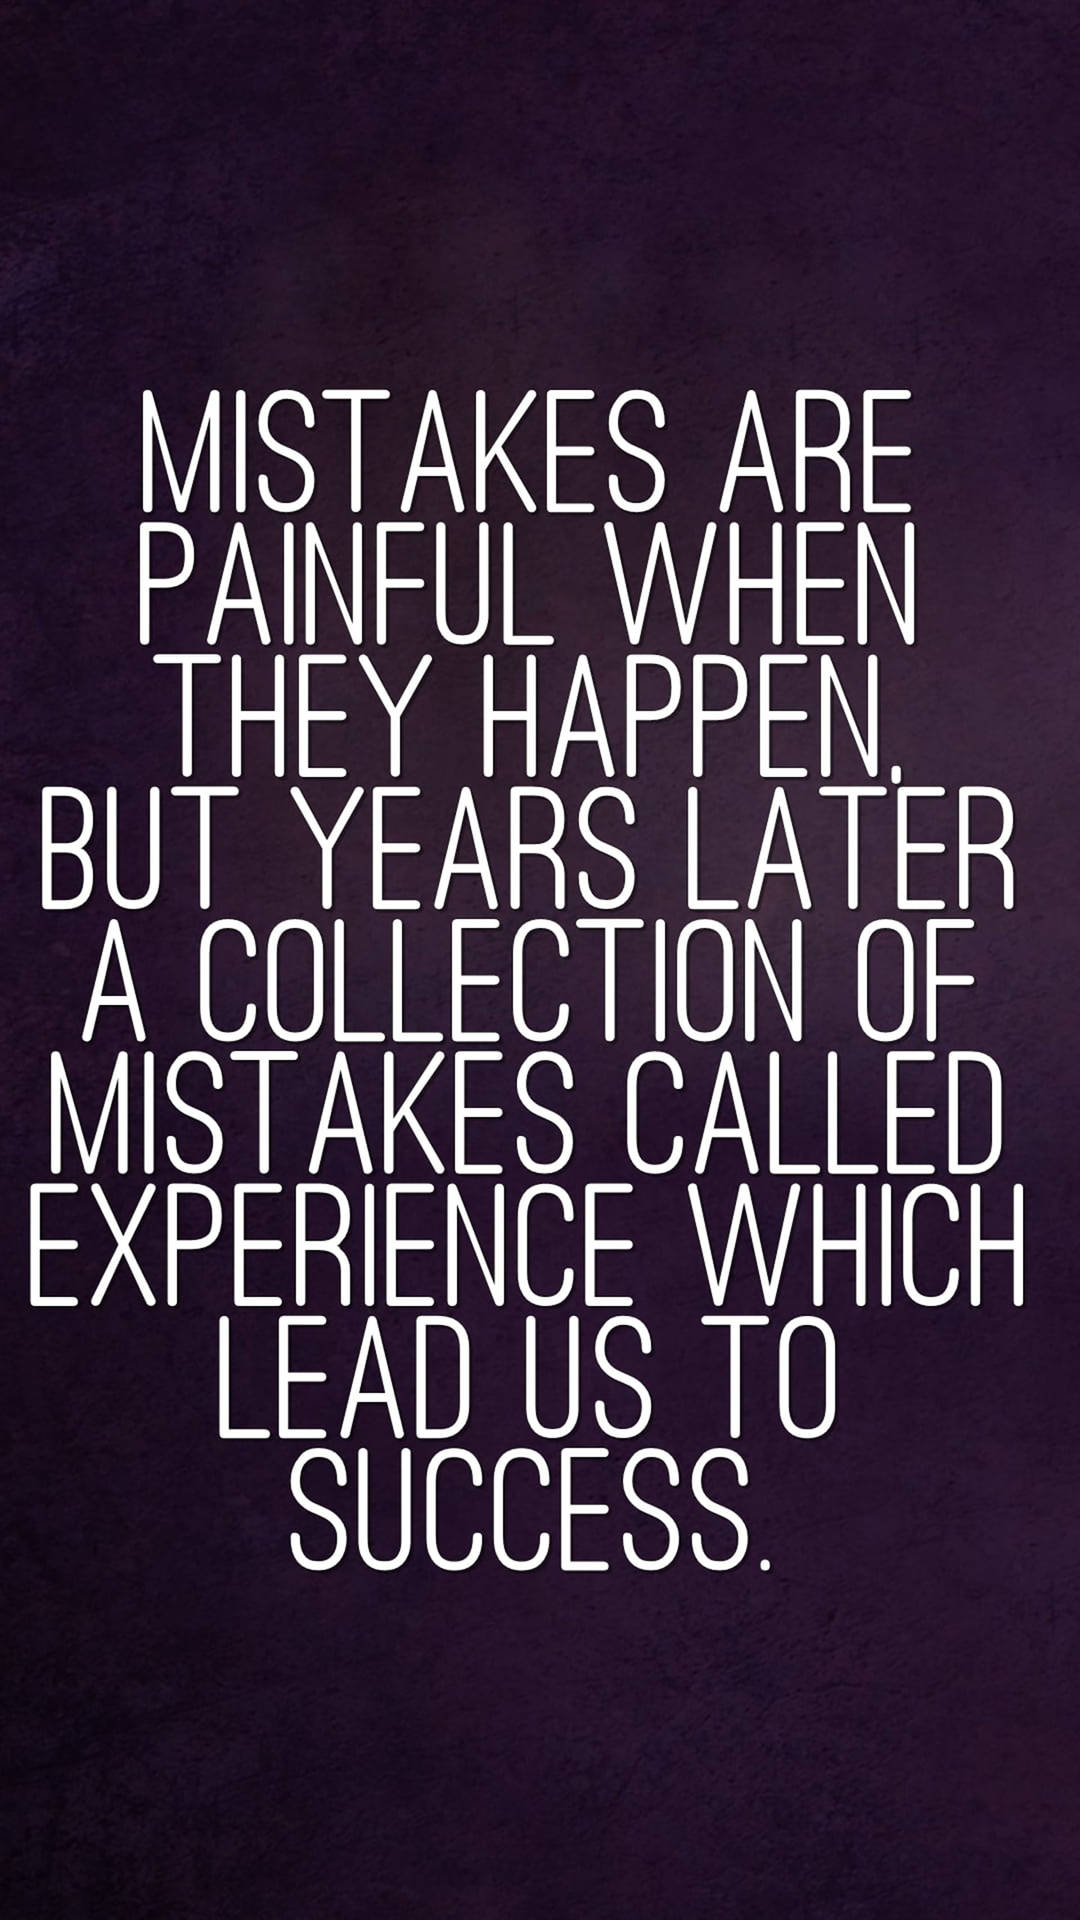 Pain Quote About Mistakes